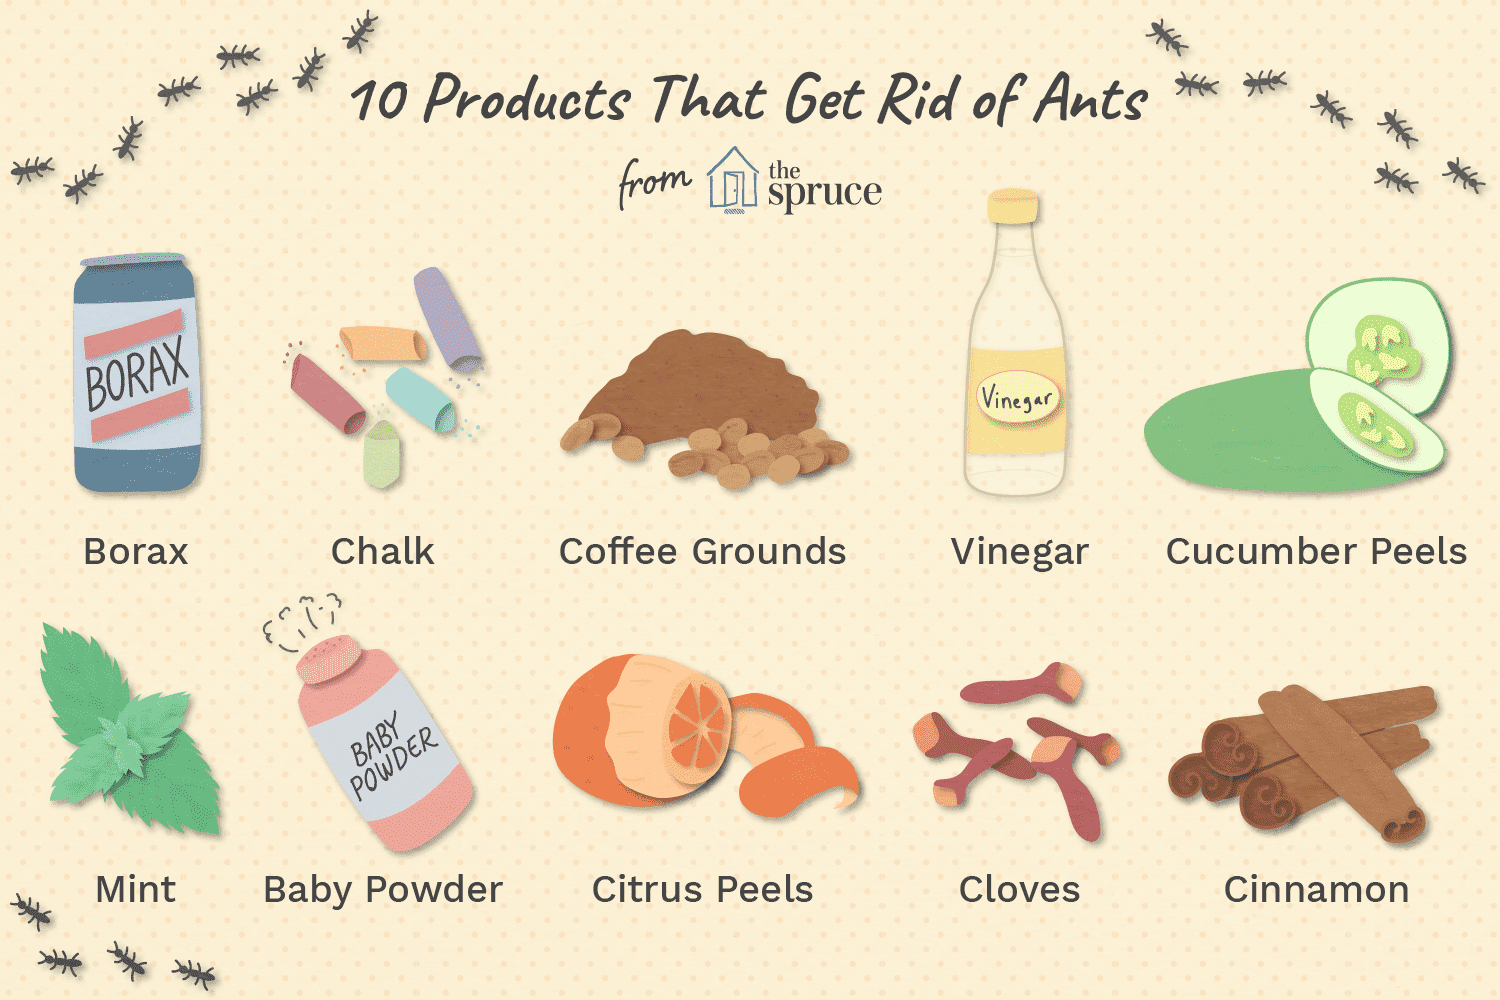 6 Cheap and Natural Remedies to Get Rid of Ants